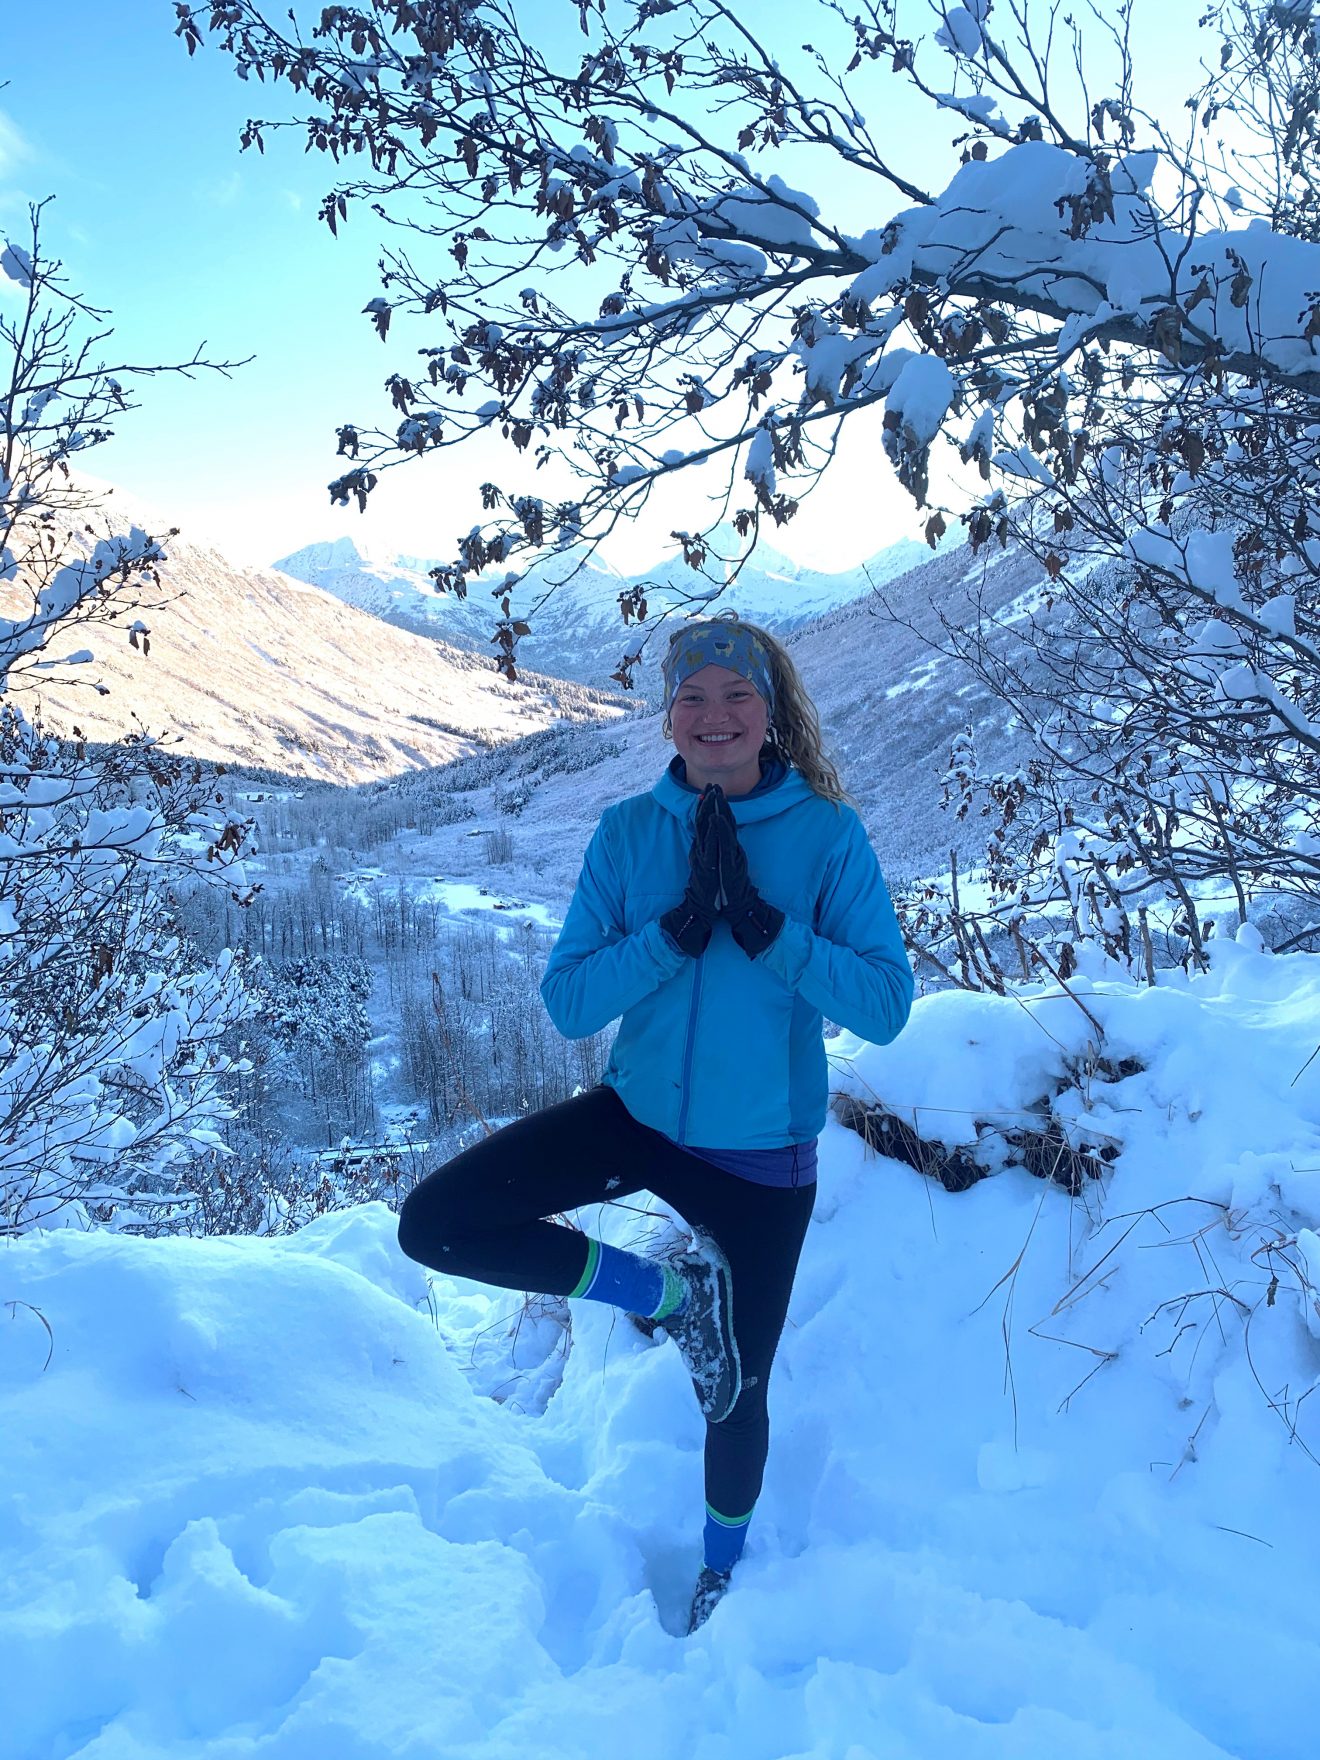 A young woman holds a yoga pose while standing in the snow. She is in winter clothing. A valley framed by mountains stretches behind her.